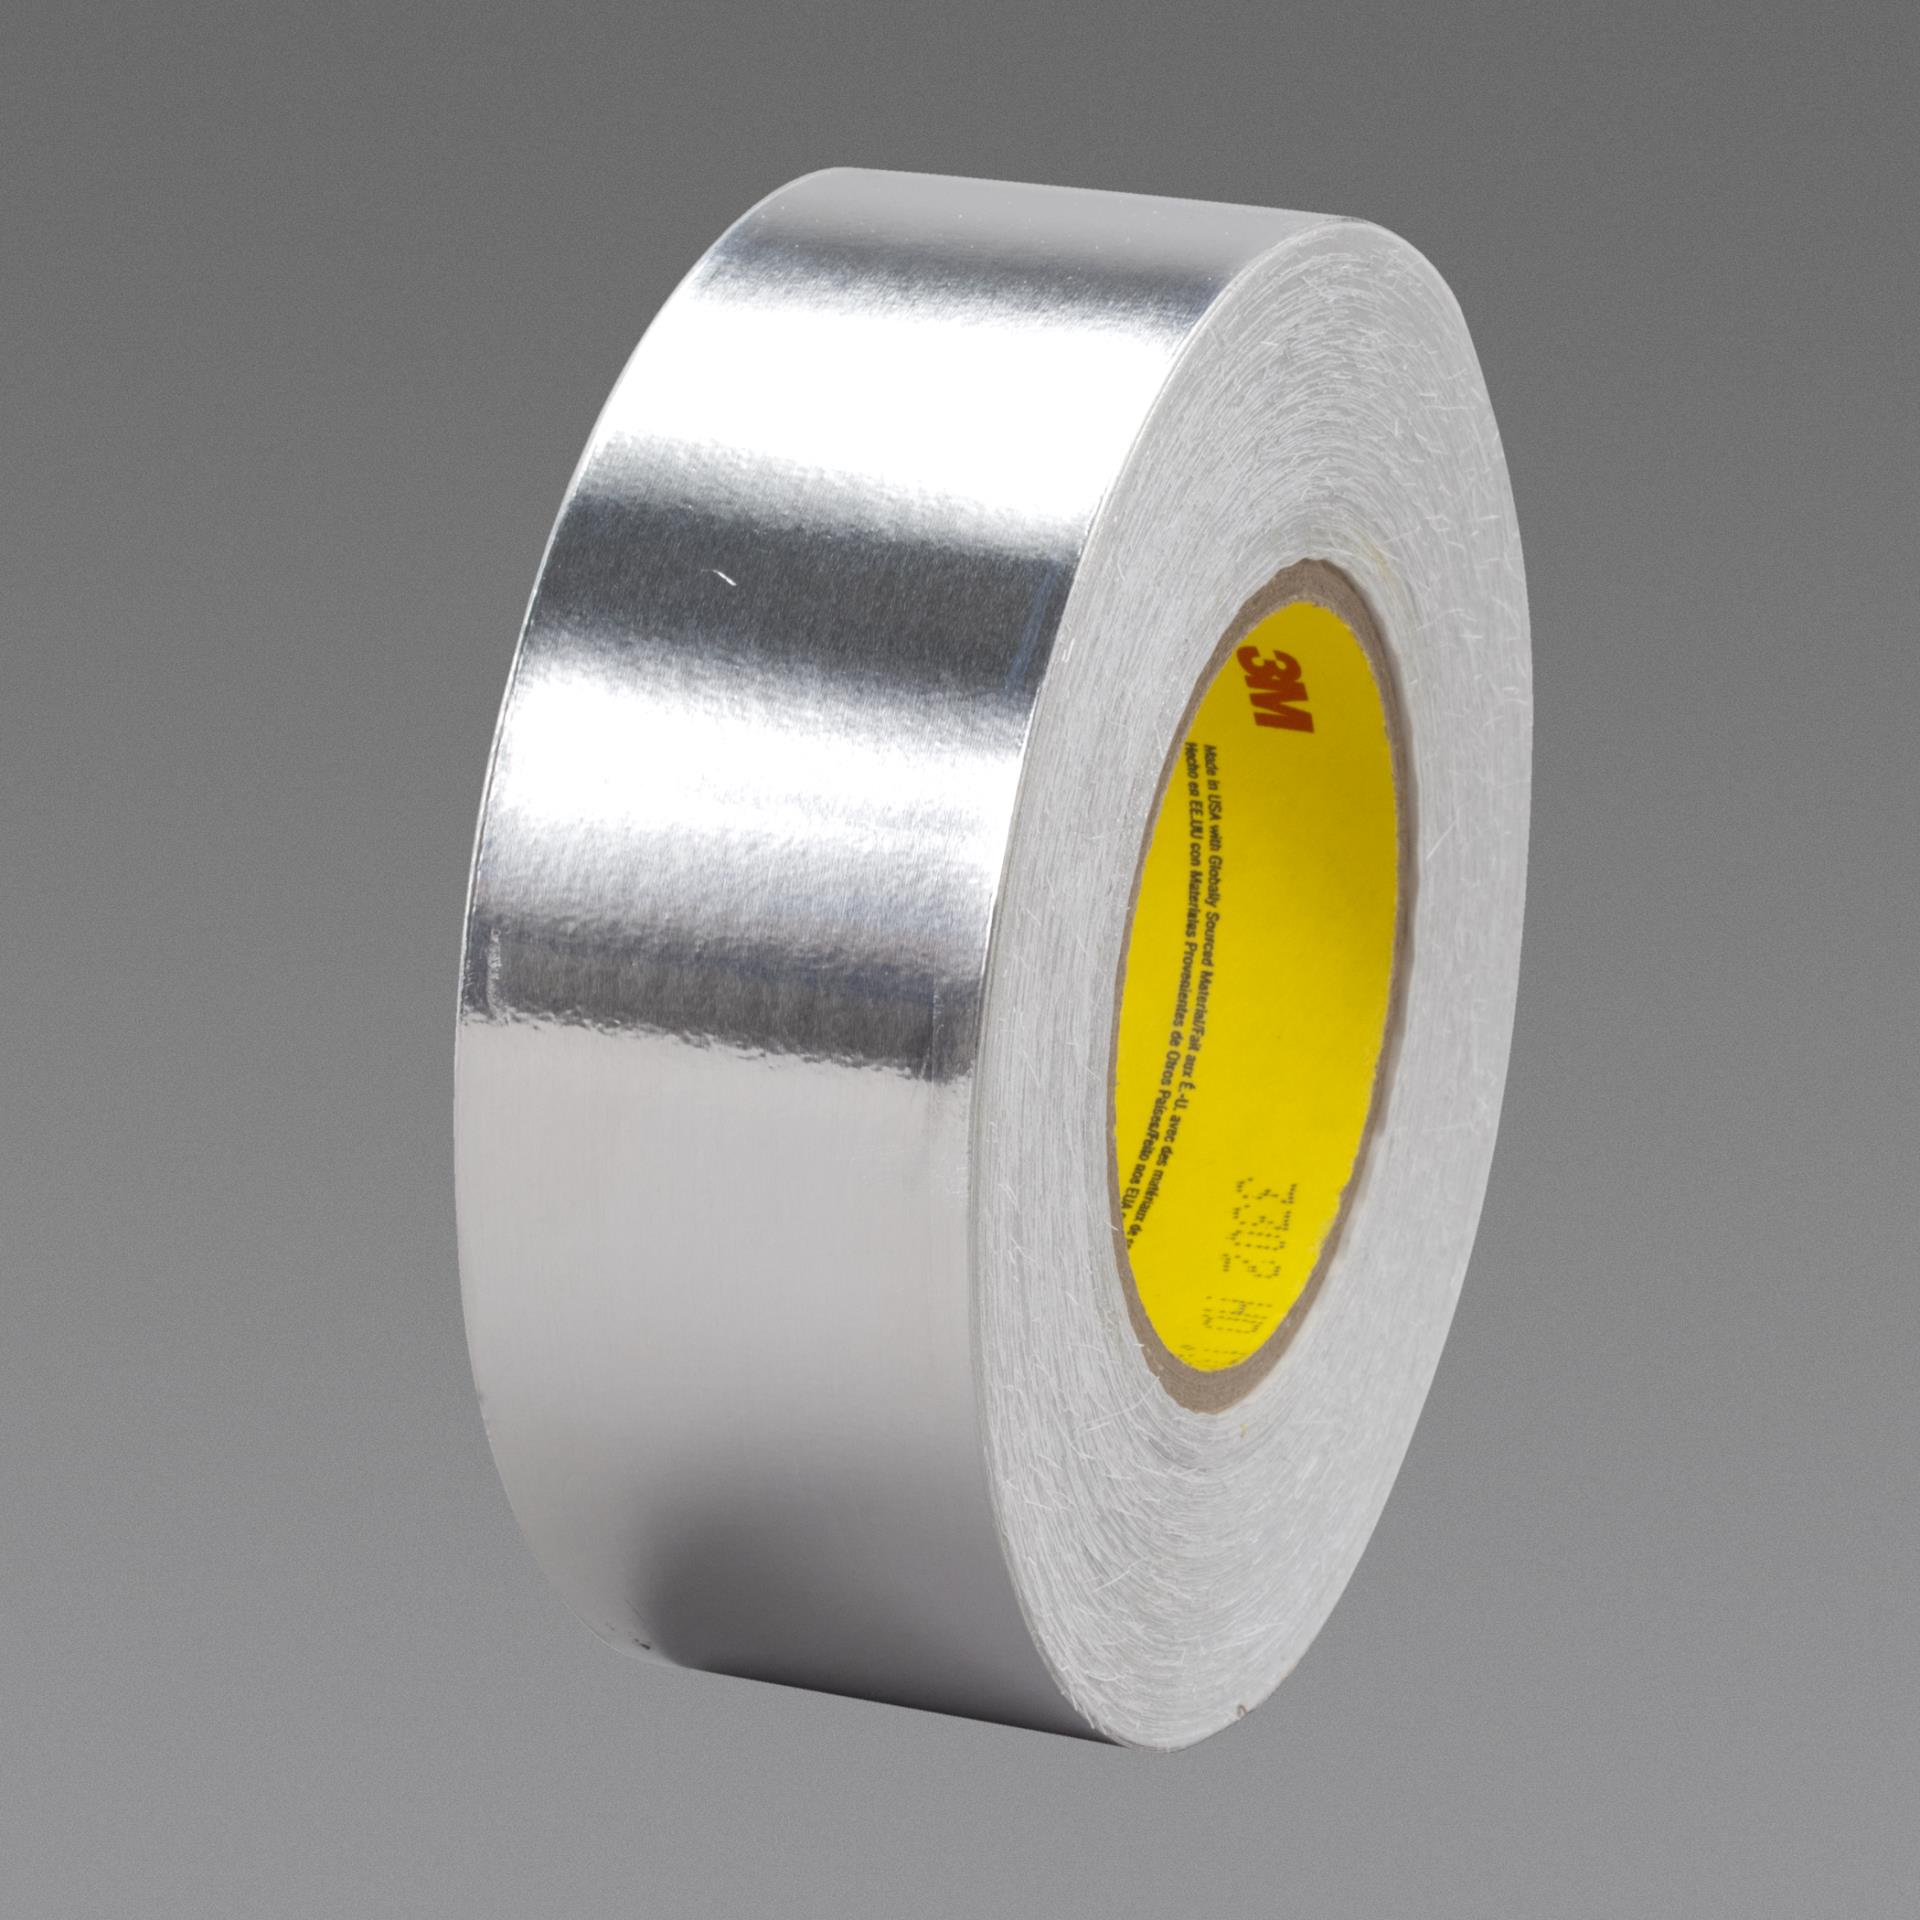 00051125658249 3M™ Conductive Aluminum Foil Tape 3302, Silver, in x 18  yd, 3.5 mil, rolls per case Aircraft products aluminum-tapes 9373915